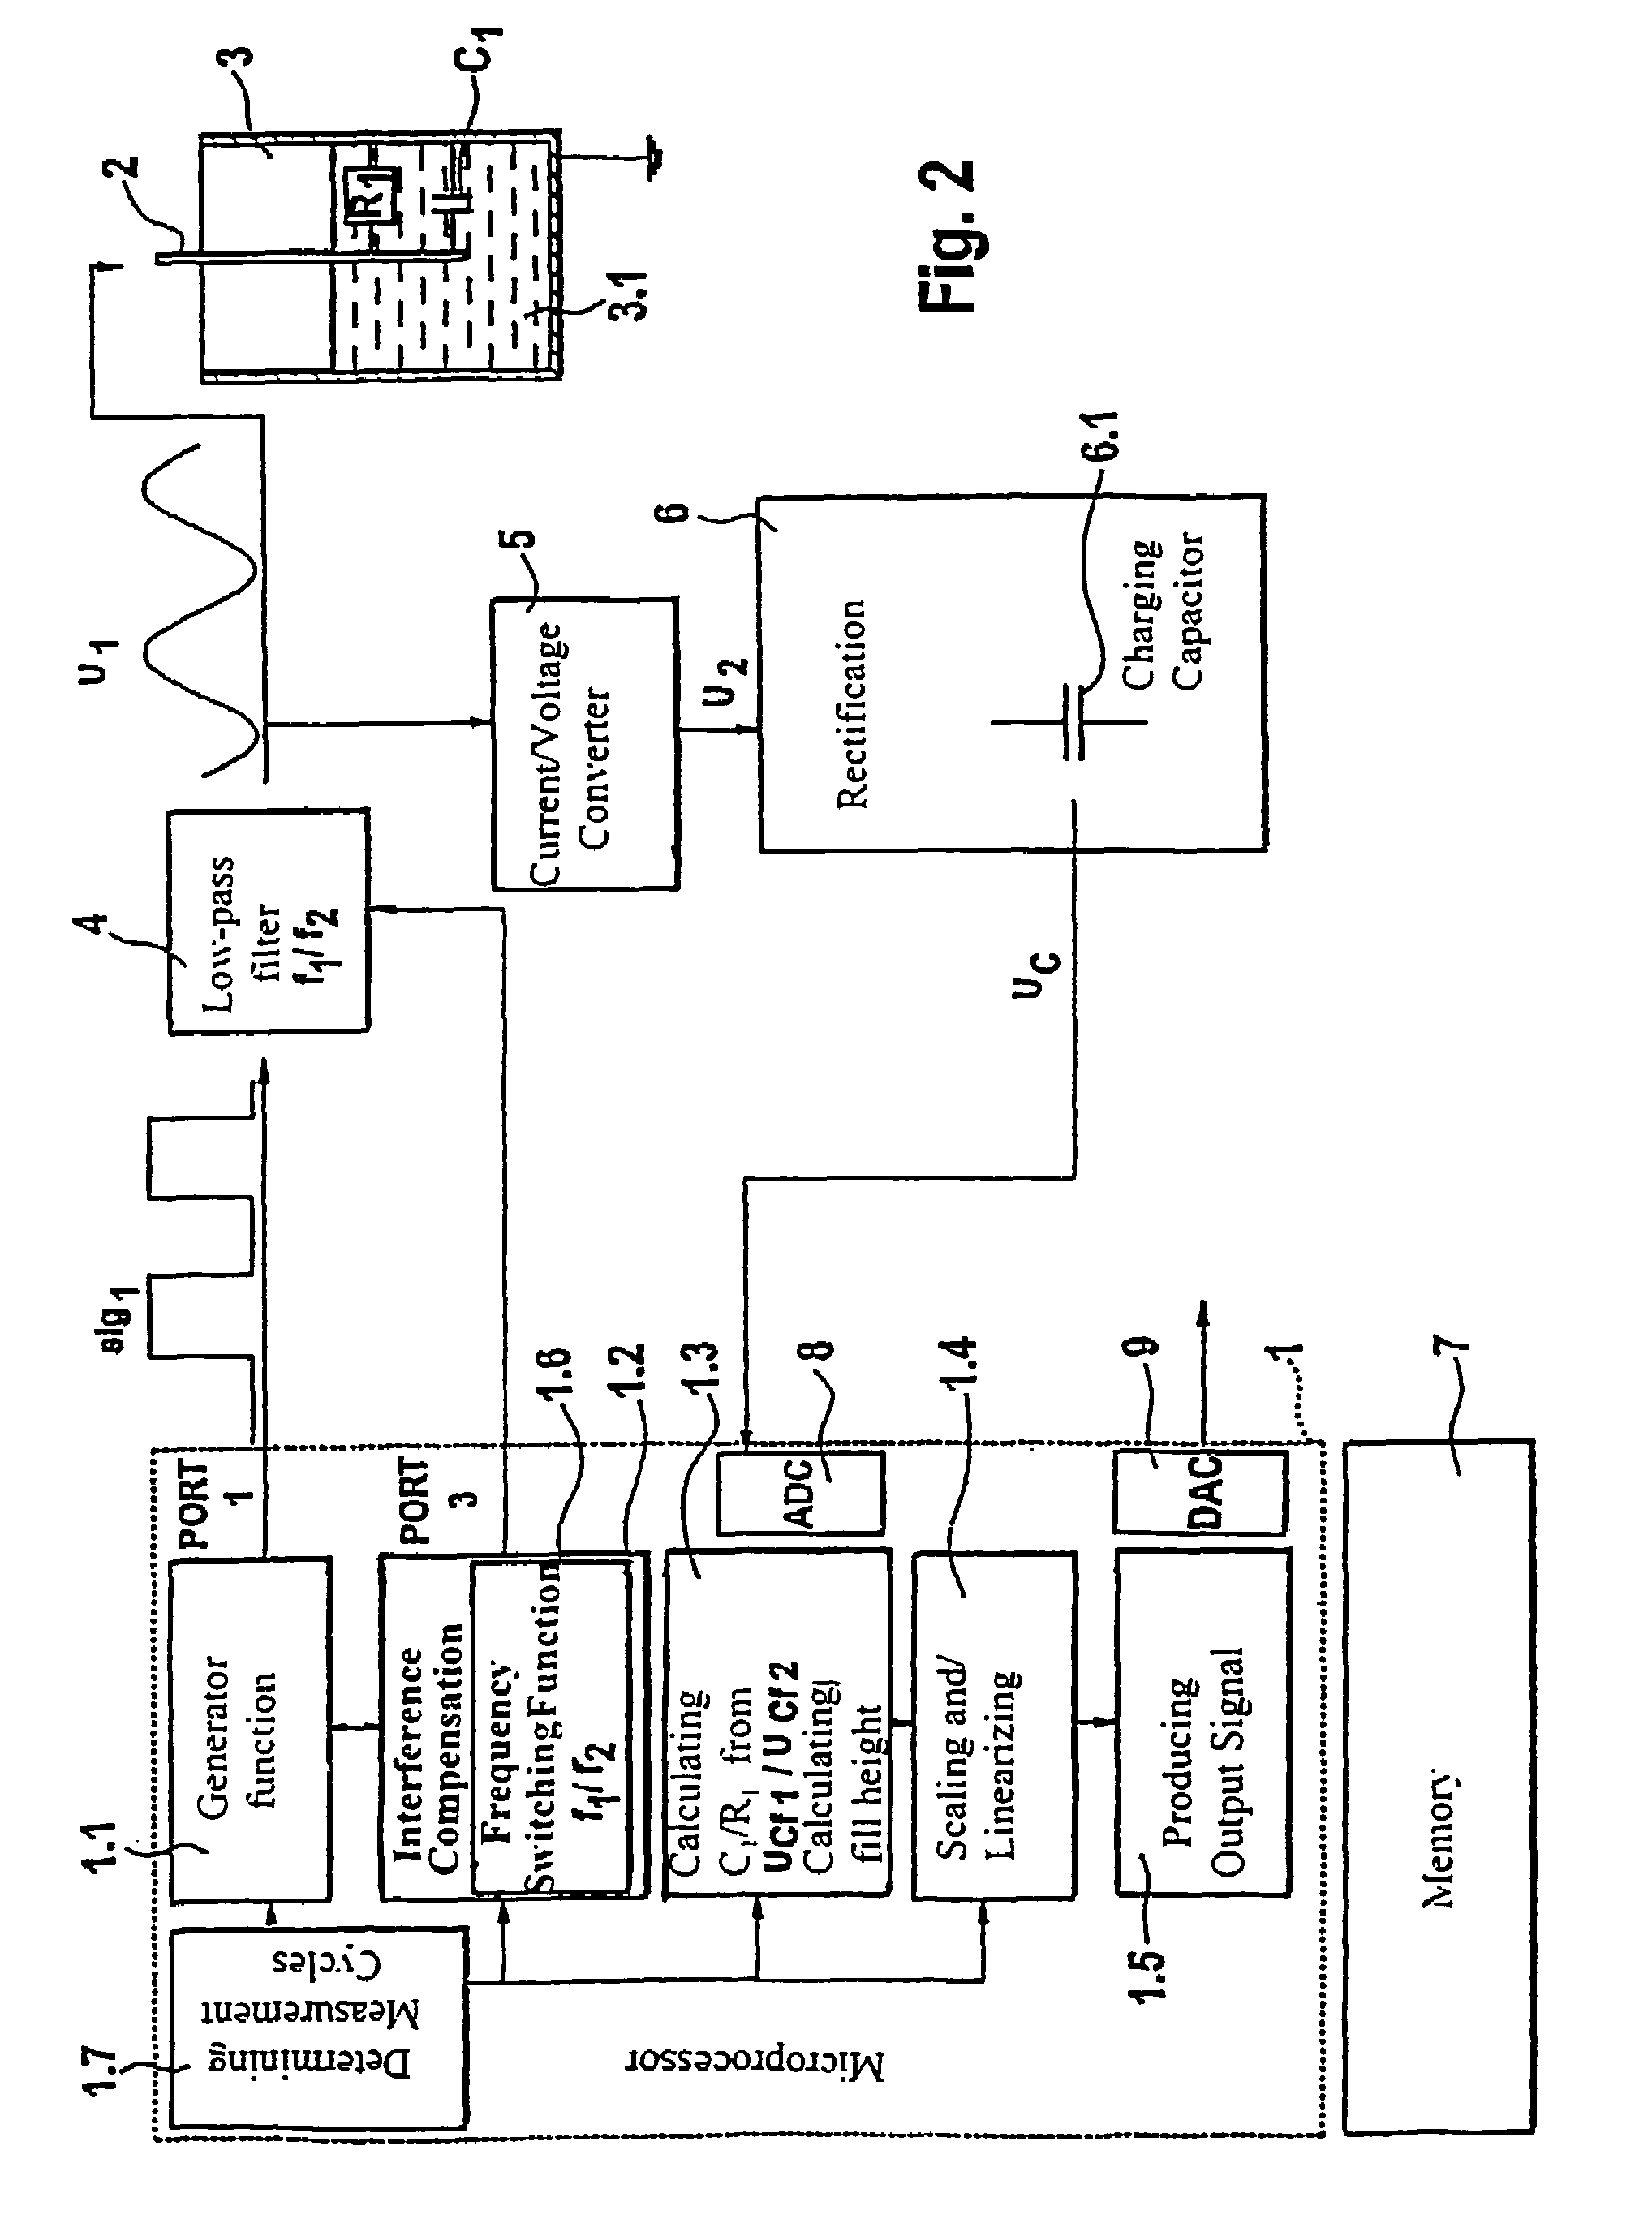 Electronic field device with a sensor unit for capacitive level measurement in a container